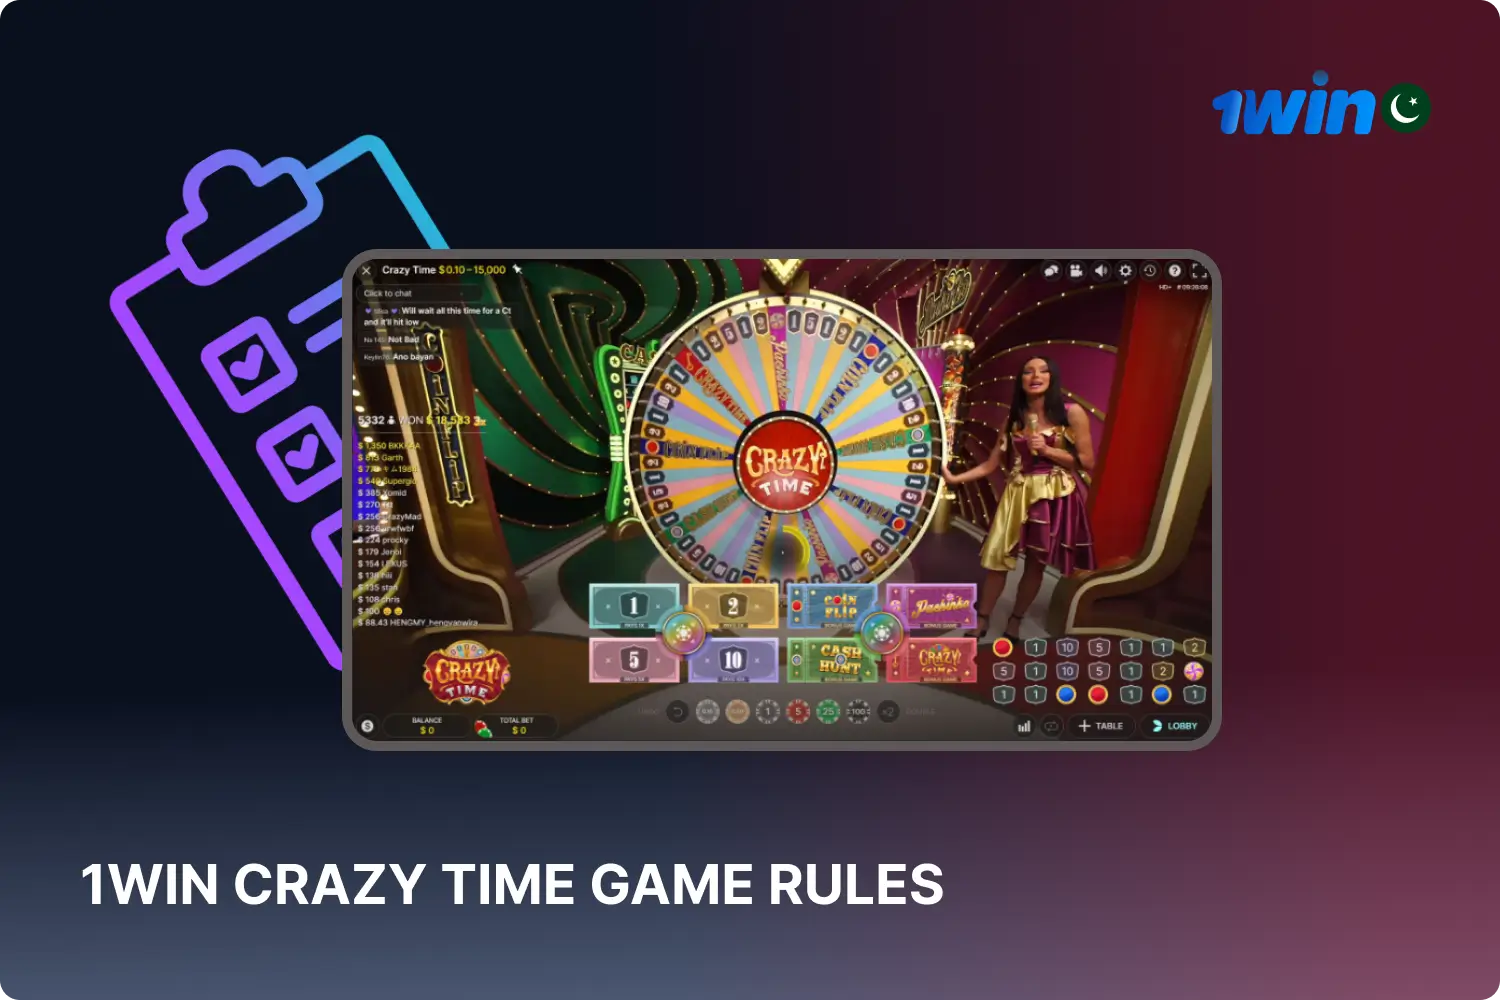 Familiarising yourself with the basic rules of Crazy Time before playing for real money at 1win will help users increase their chances of winning